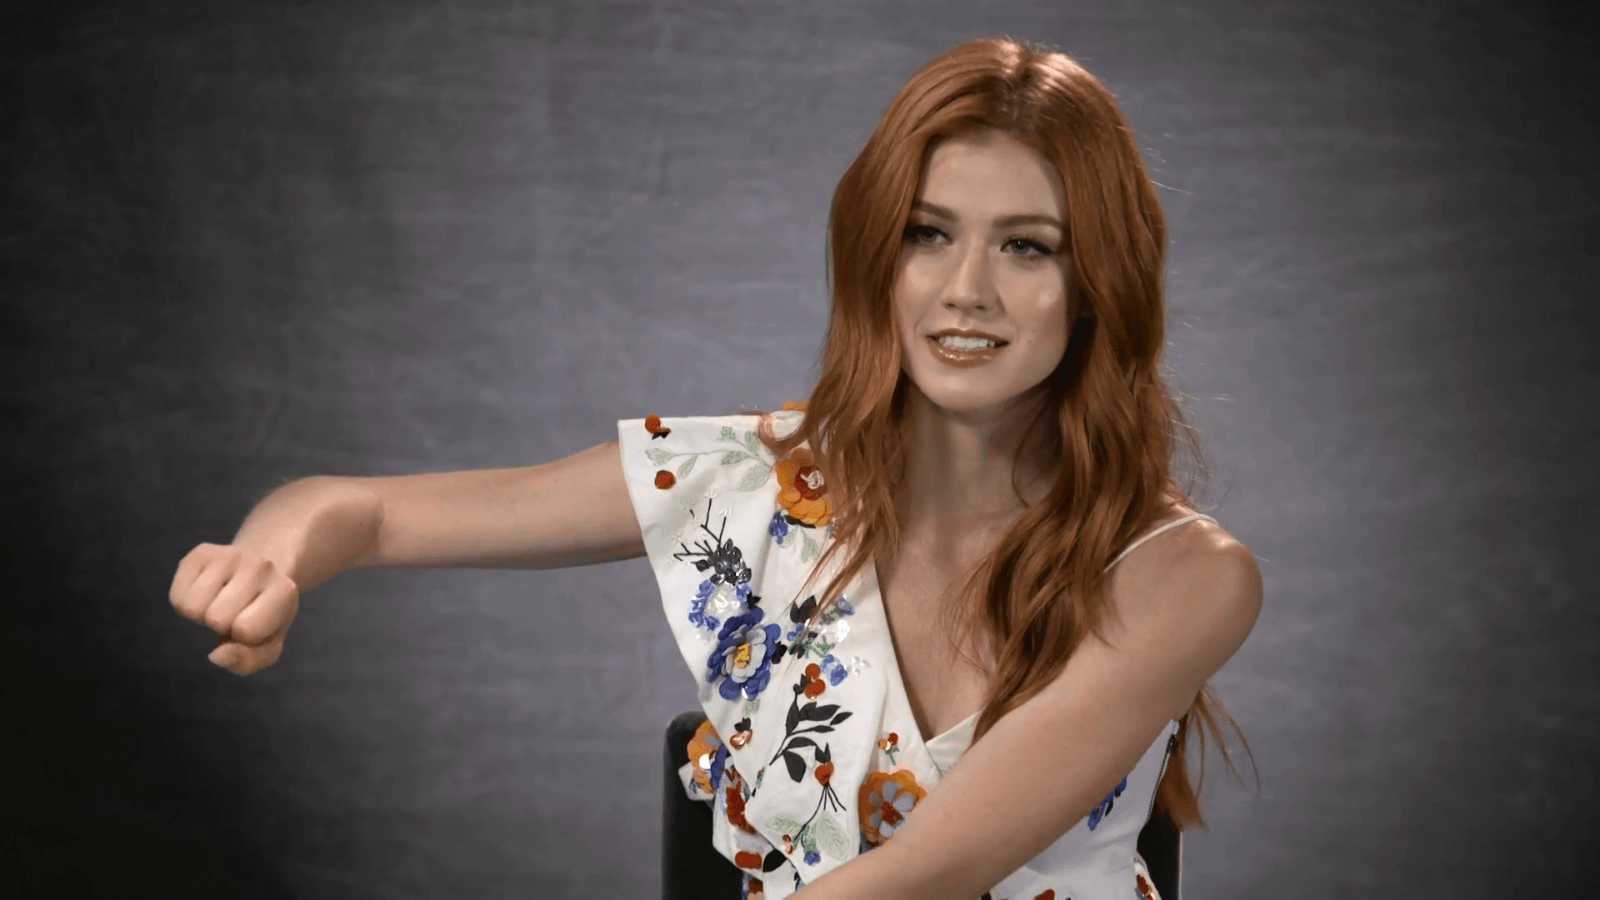 WATCH: Shadowhunters' Kat McNamara on Clace shipping and what's